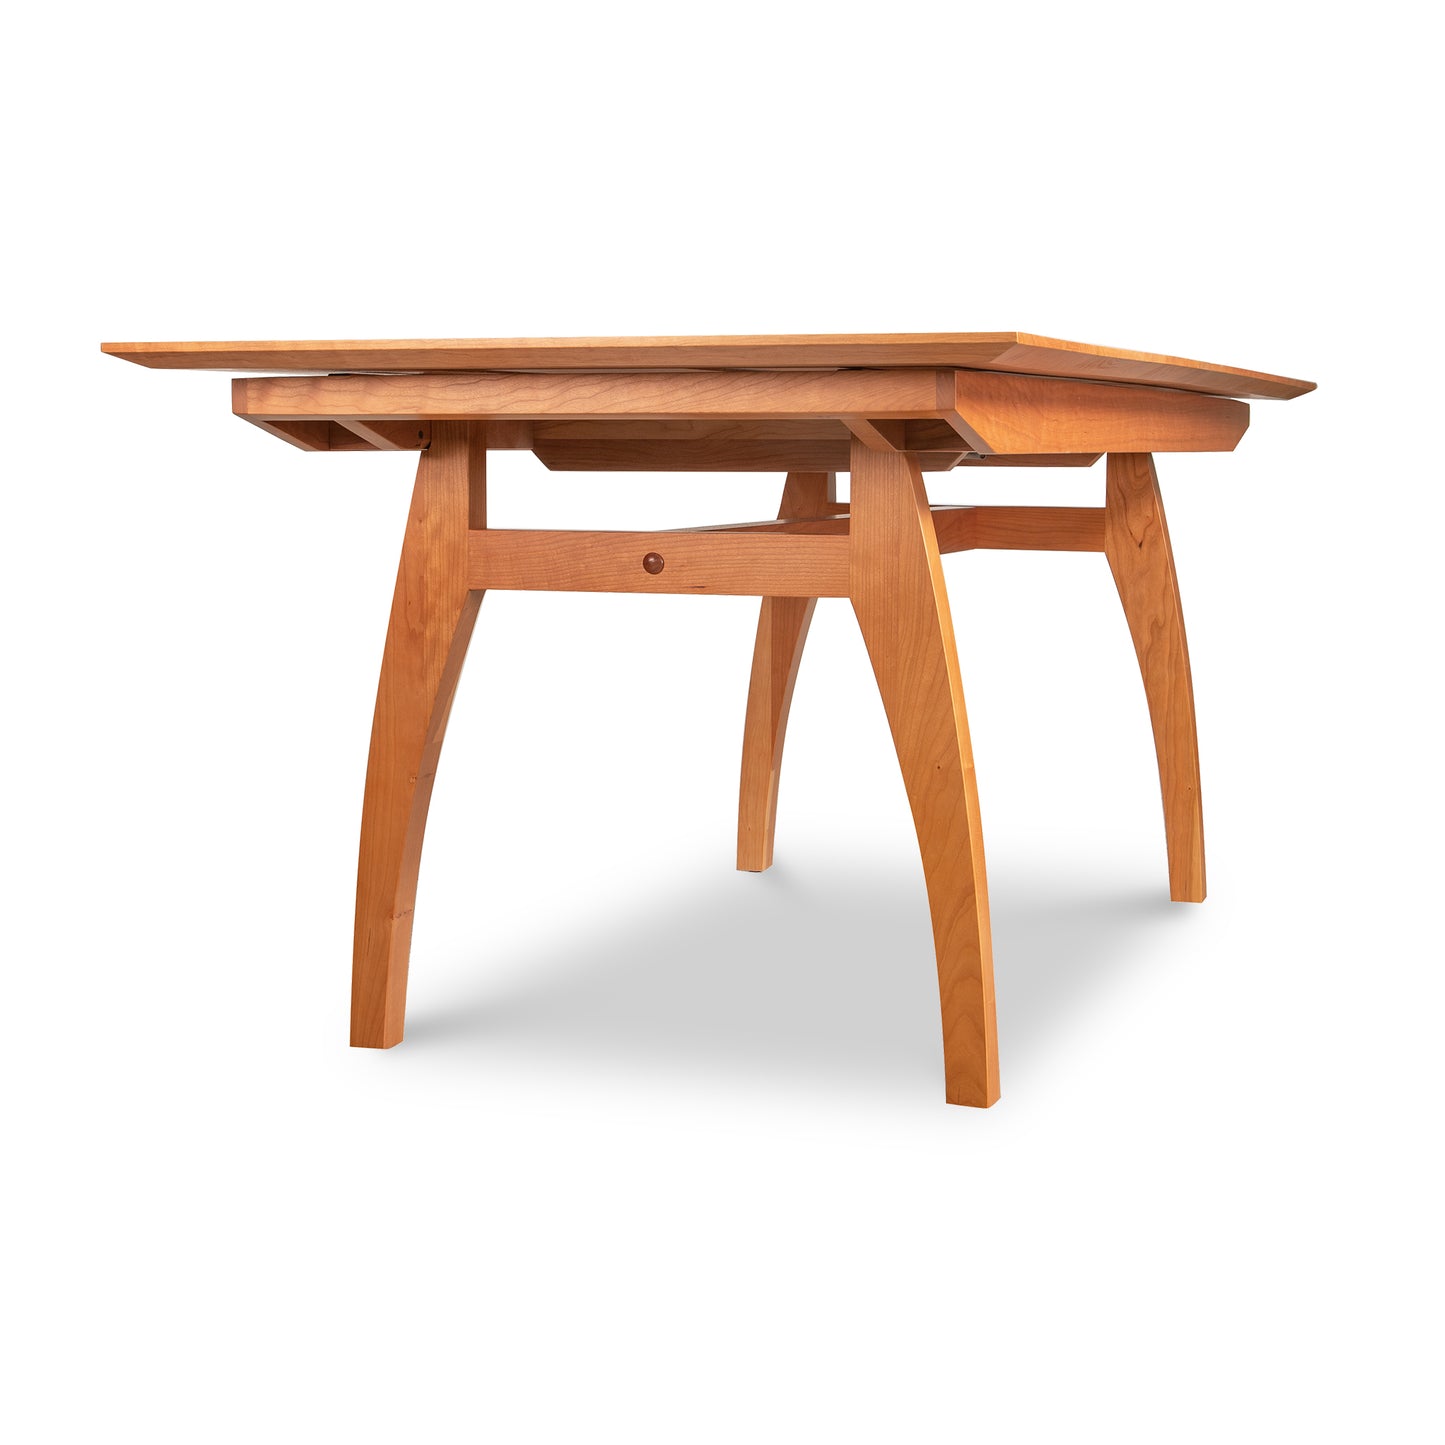 A high-end, handmade Vermont Modern Butterfly Extension Table from Lyndon Furniture with a wooden top and legs.